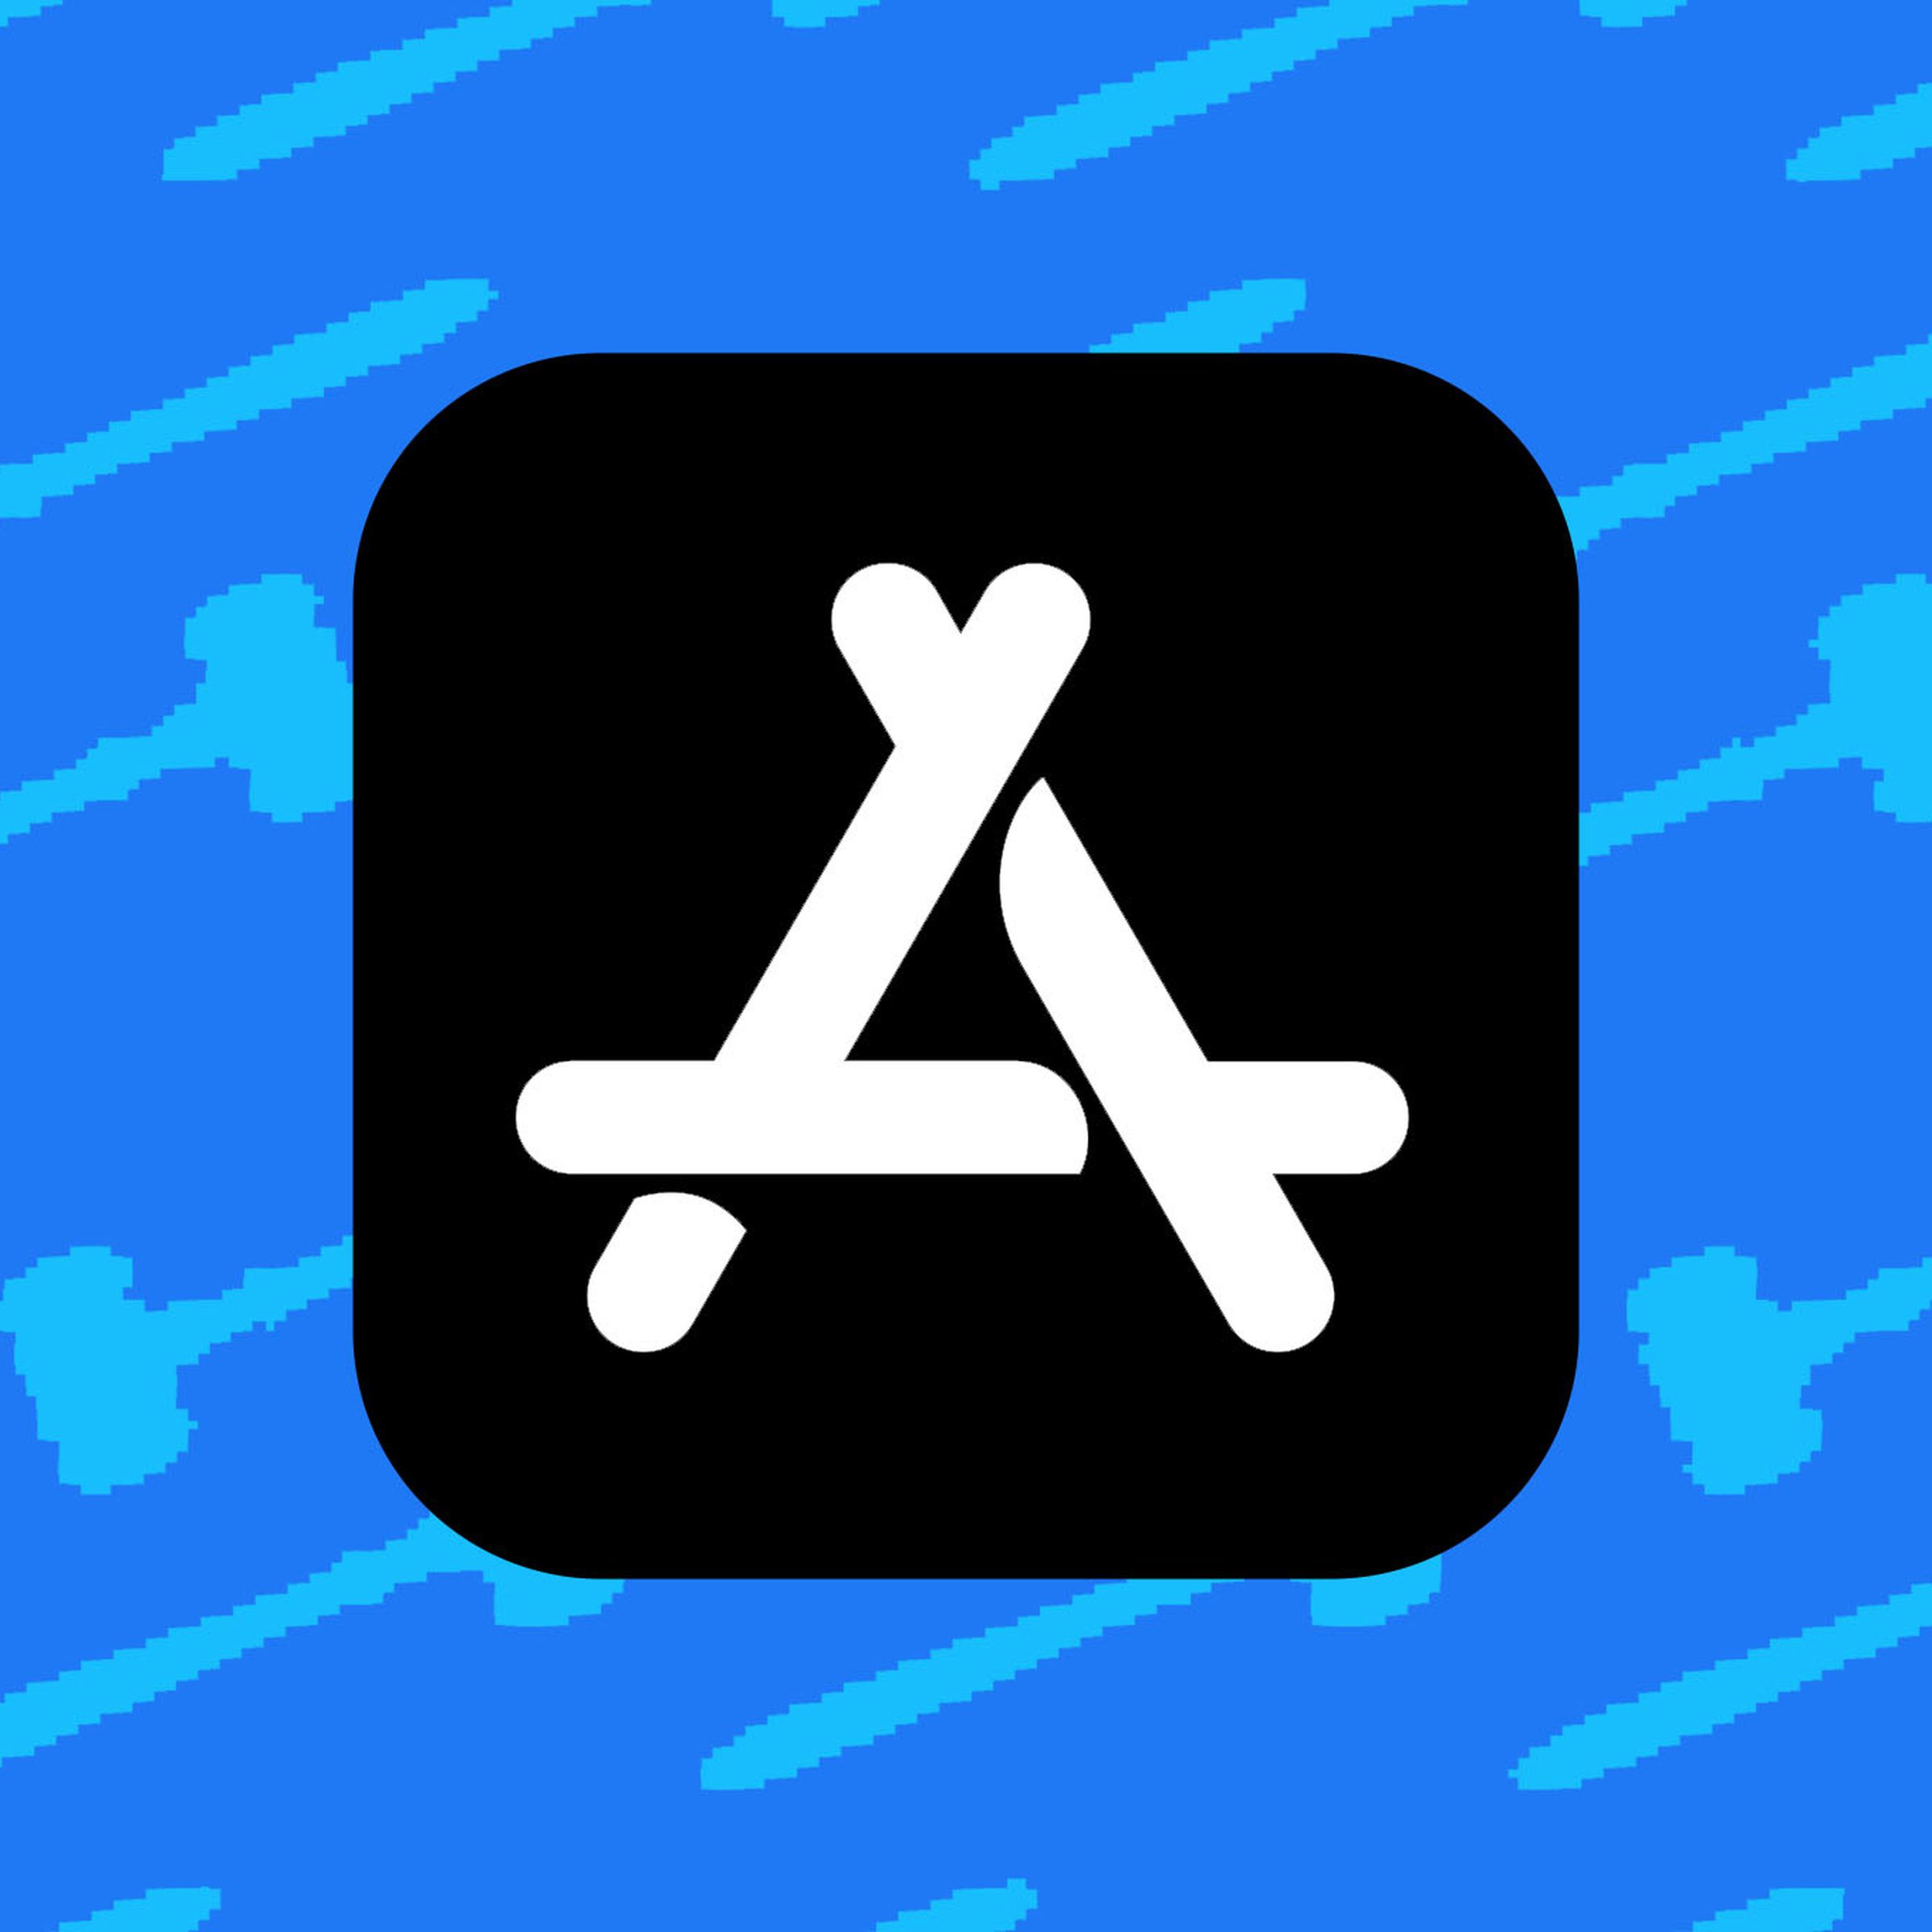 Illustration of the App Store logo in front of a background of gavels.